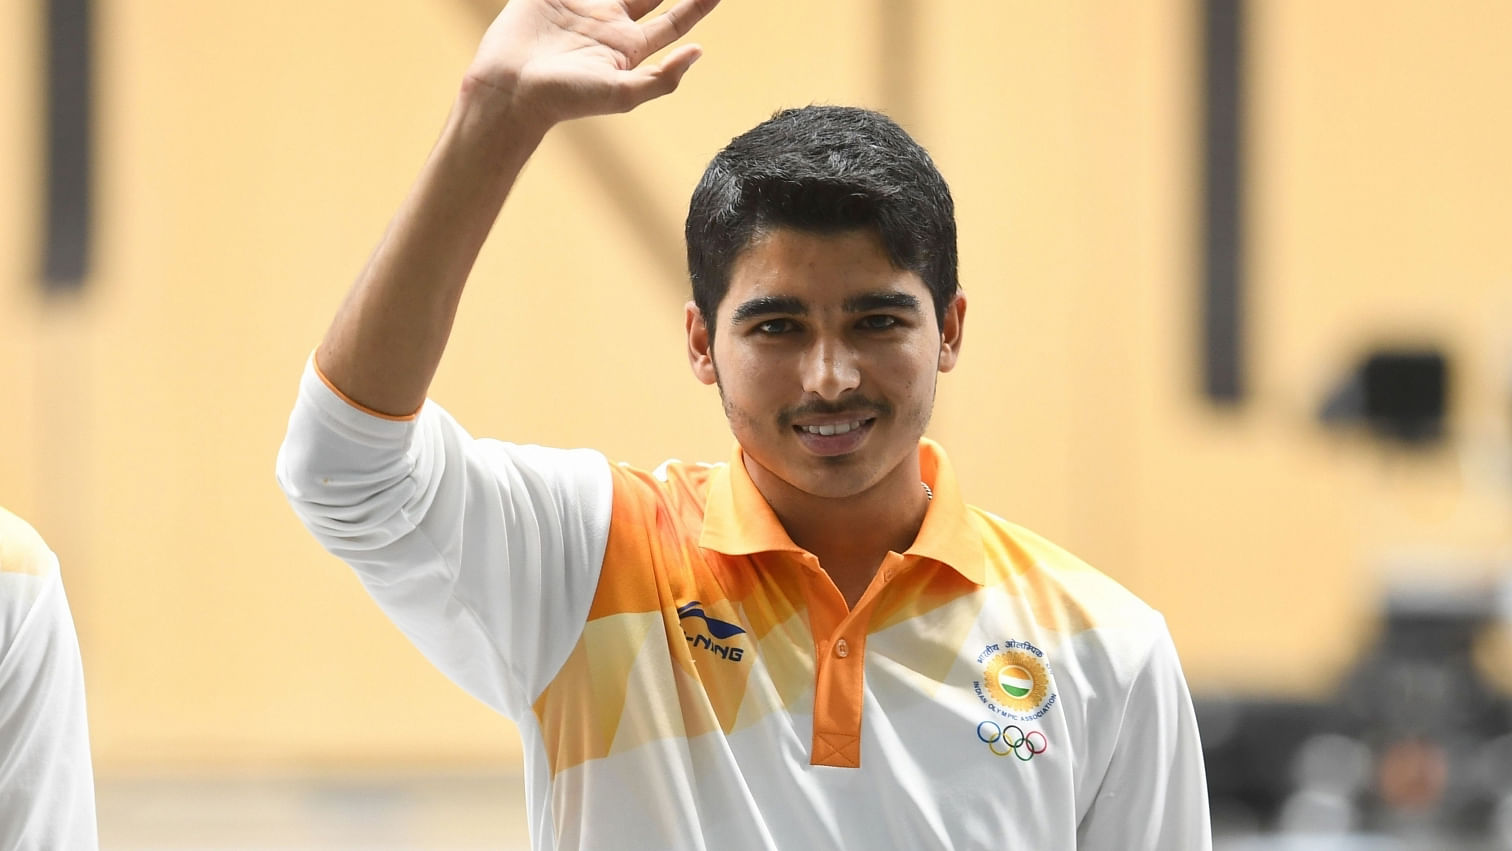 Saurabh Chaudhary (centre) had won the gold medal in the 10m Air Pistol Final at the recently concluded Asian Games.